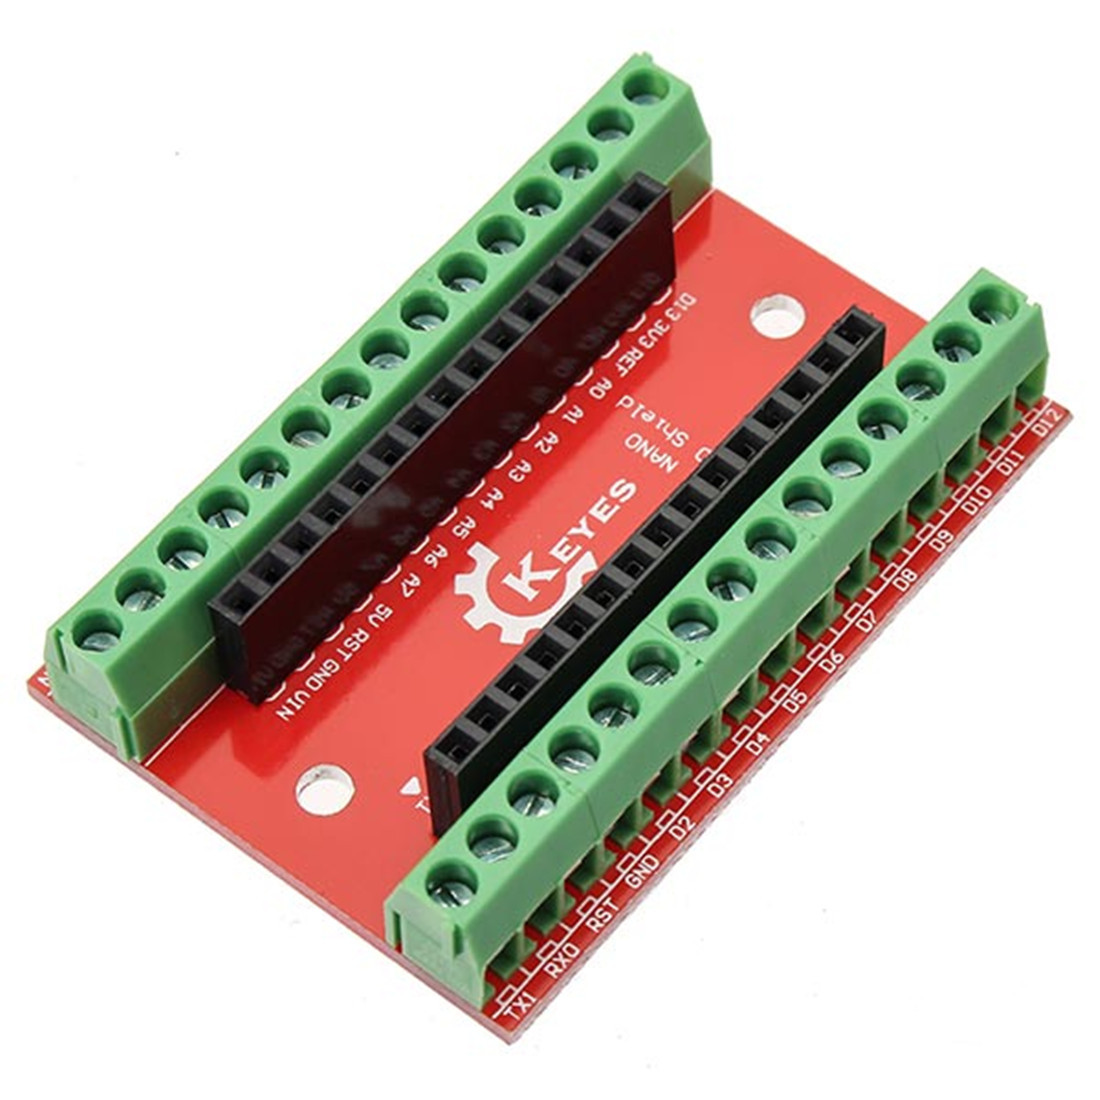 NANO-IO-Shield-Expansion-Board-Geekcreit-for-Arduino---products-that-work-with-official-Arduino-boar-963967-3